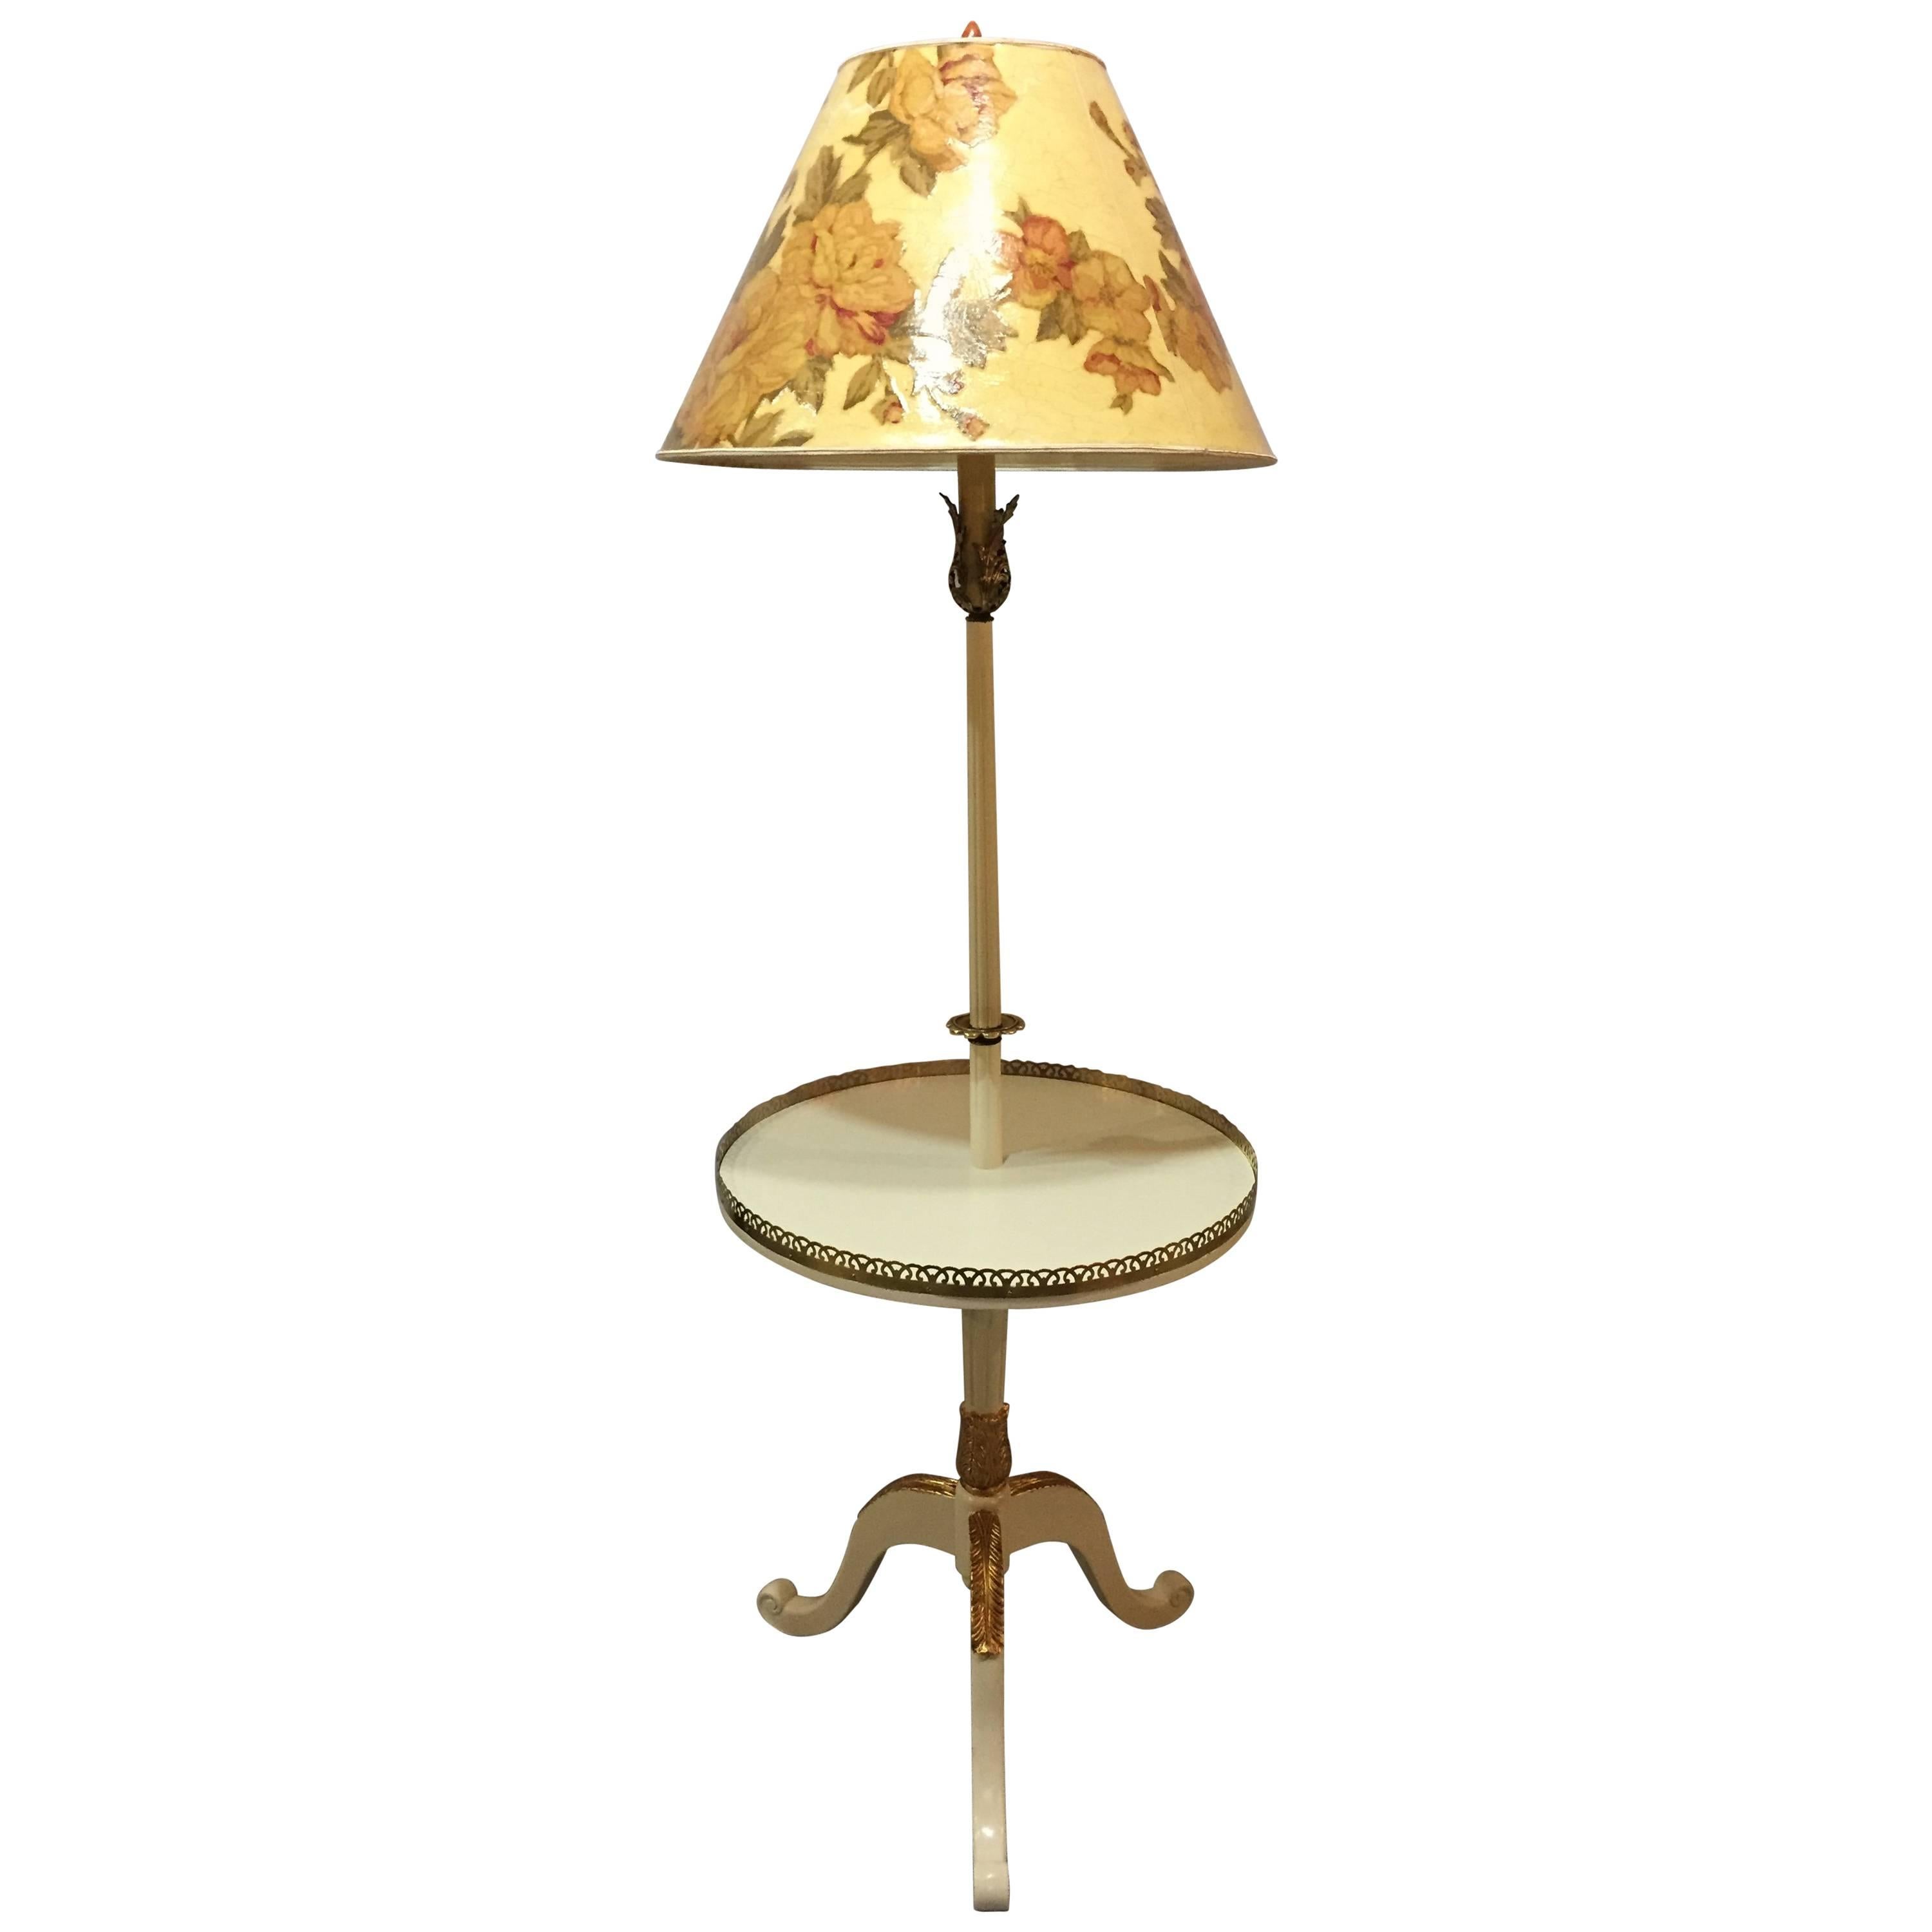 Off-White and Gilt Gold Paint Decorated Table Lamp with Custom Shade